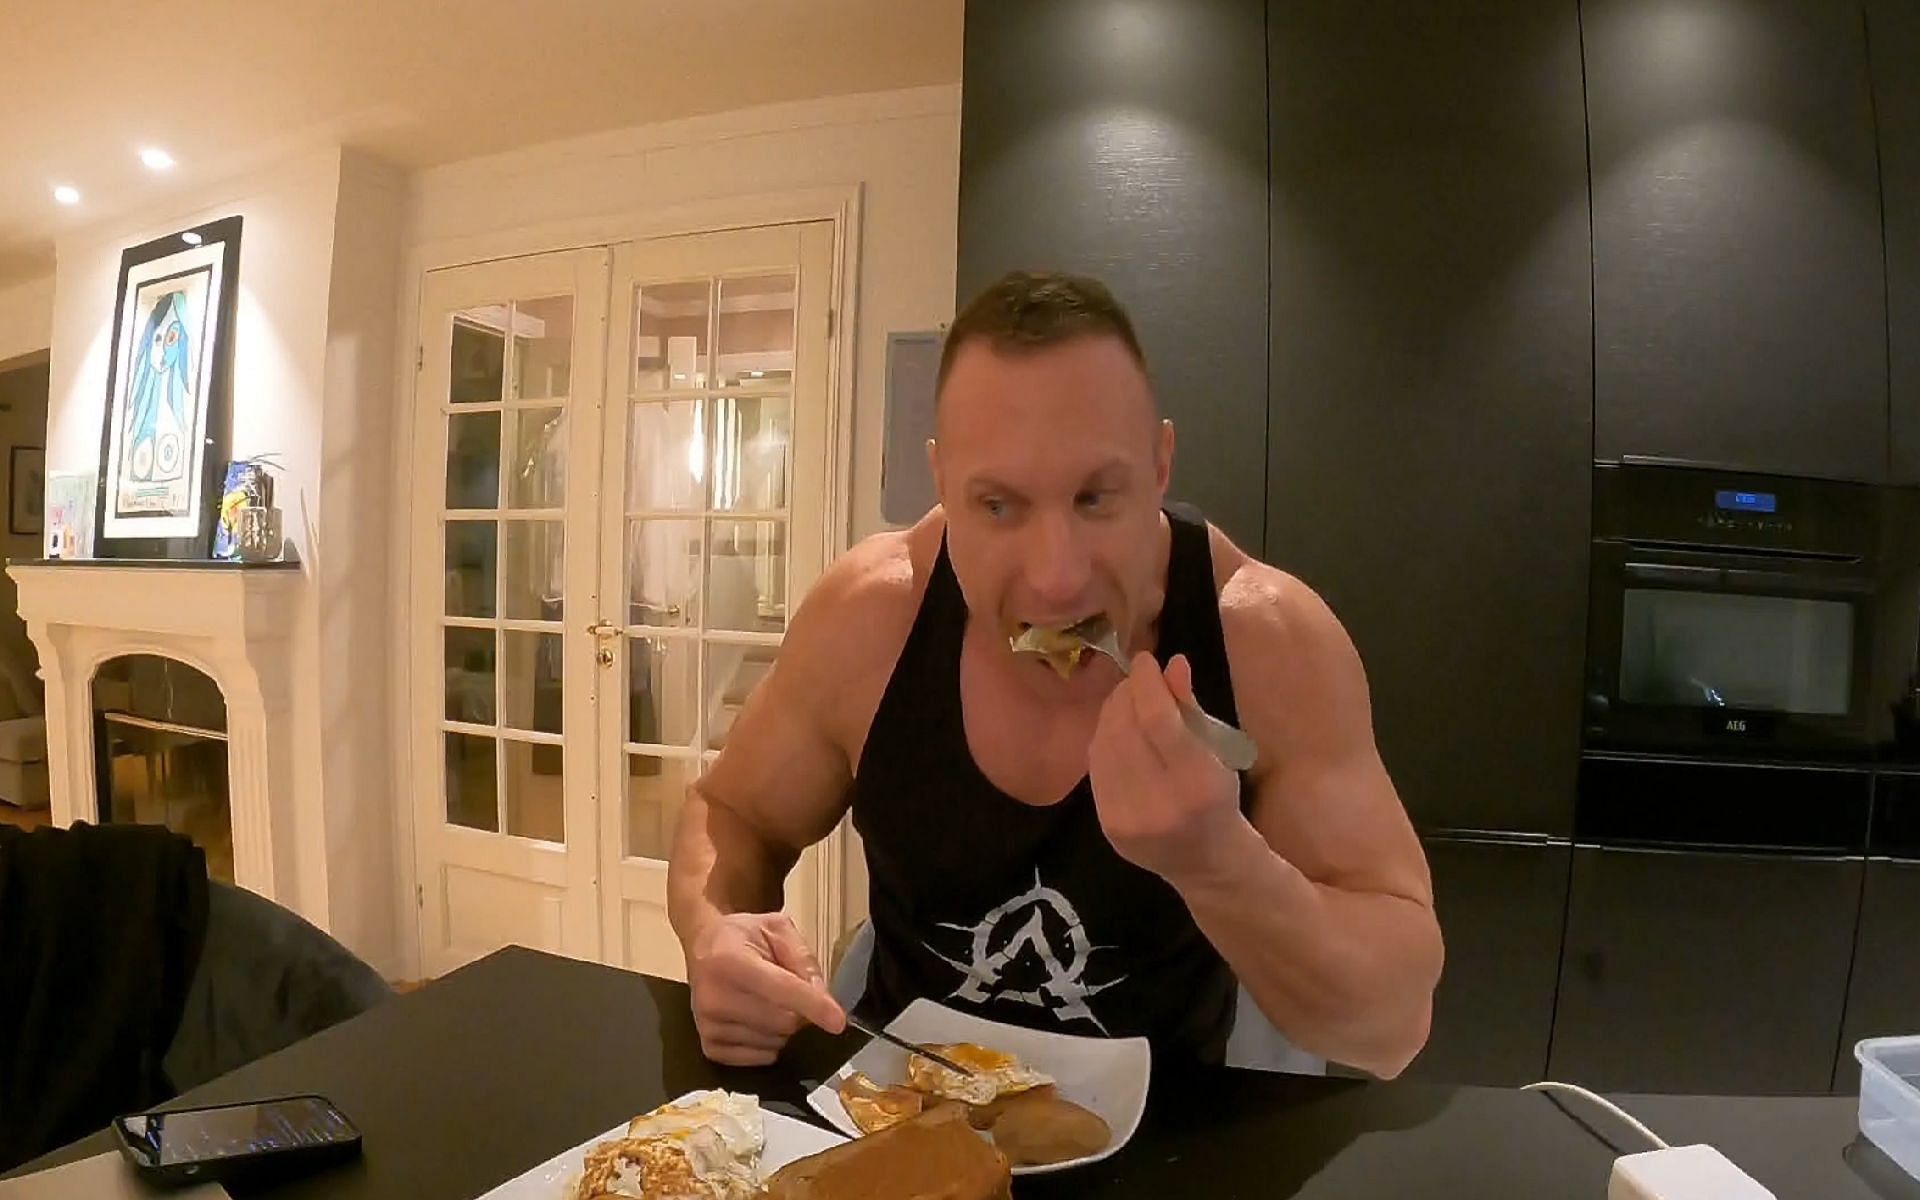 Knut prepares and consumes a 5000 calorie meal as he livestreams (Images via Twitch/Knut)